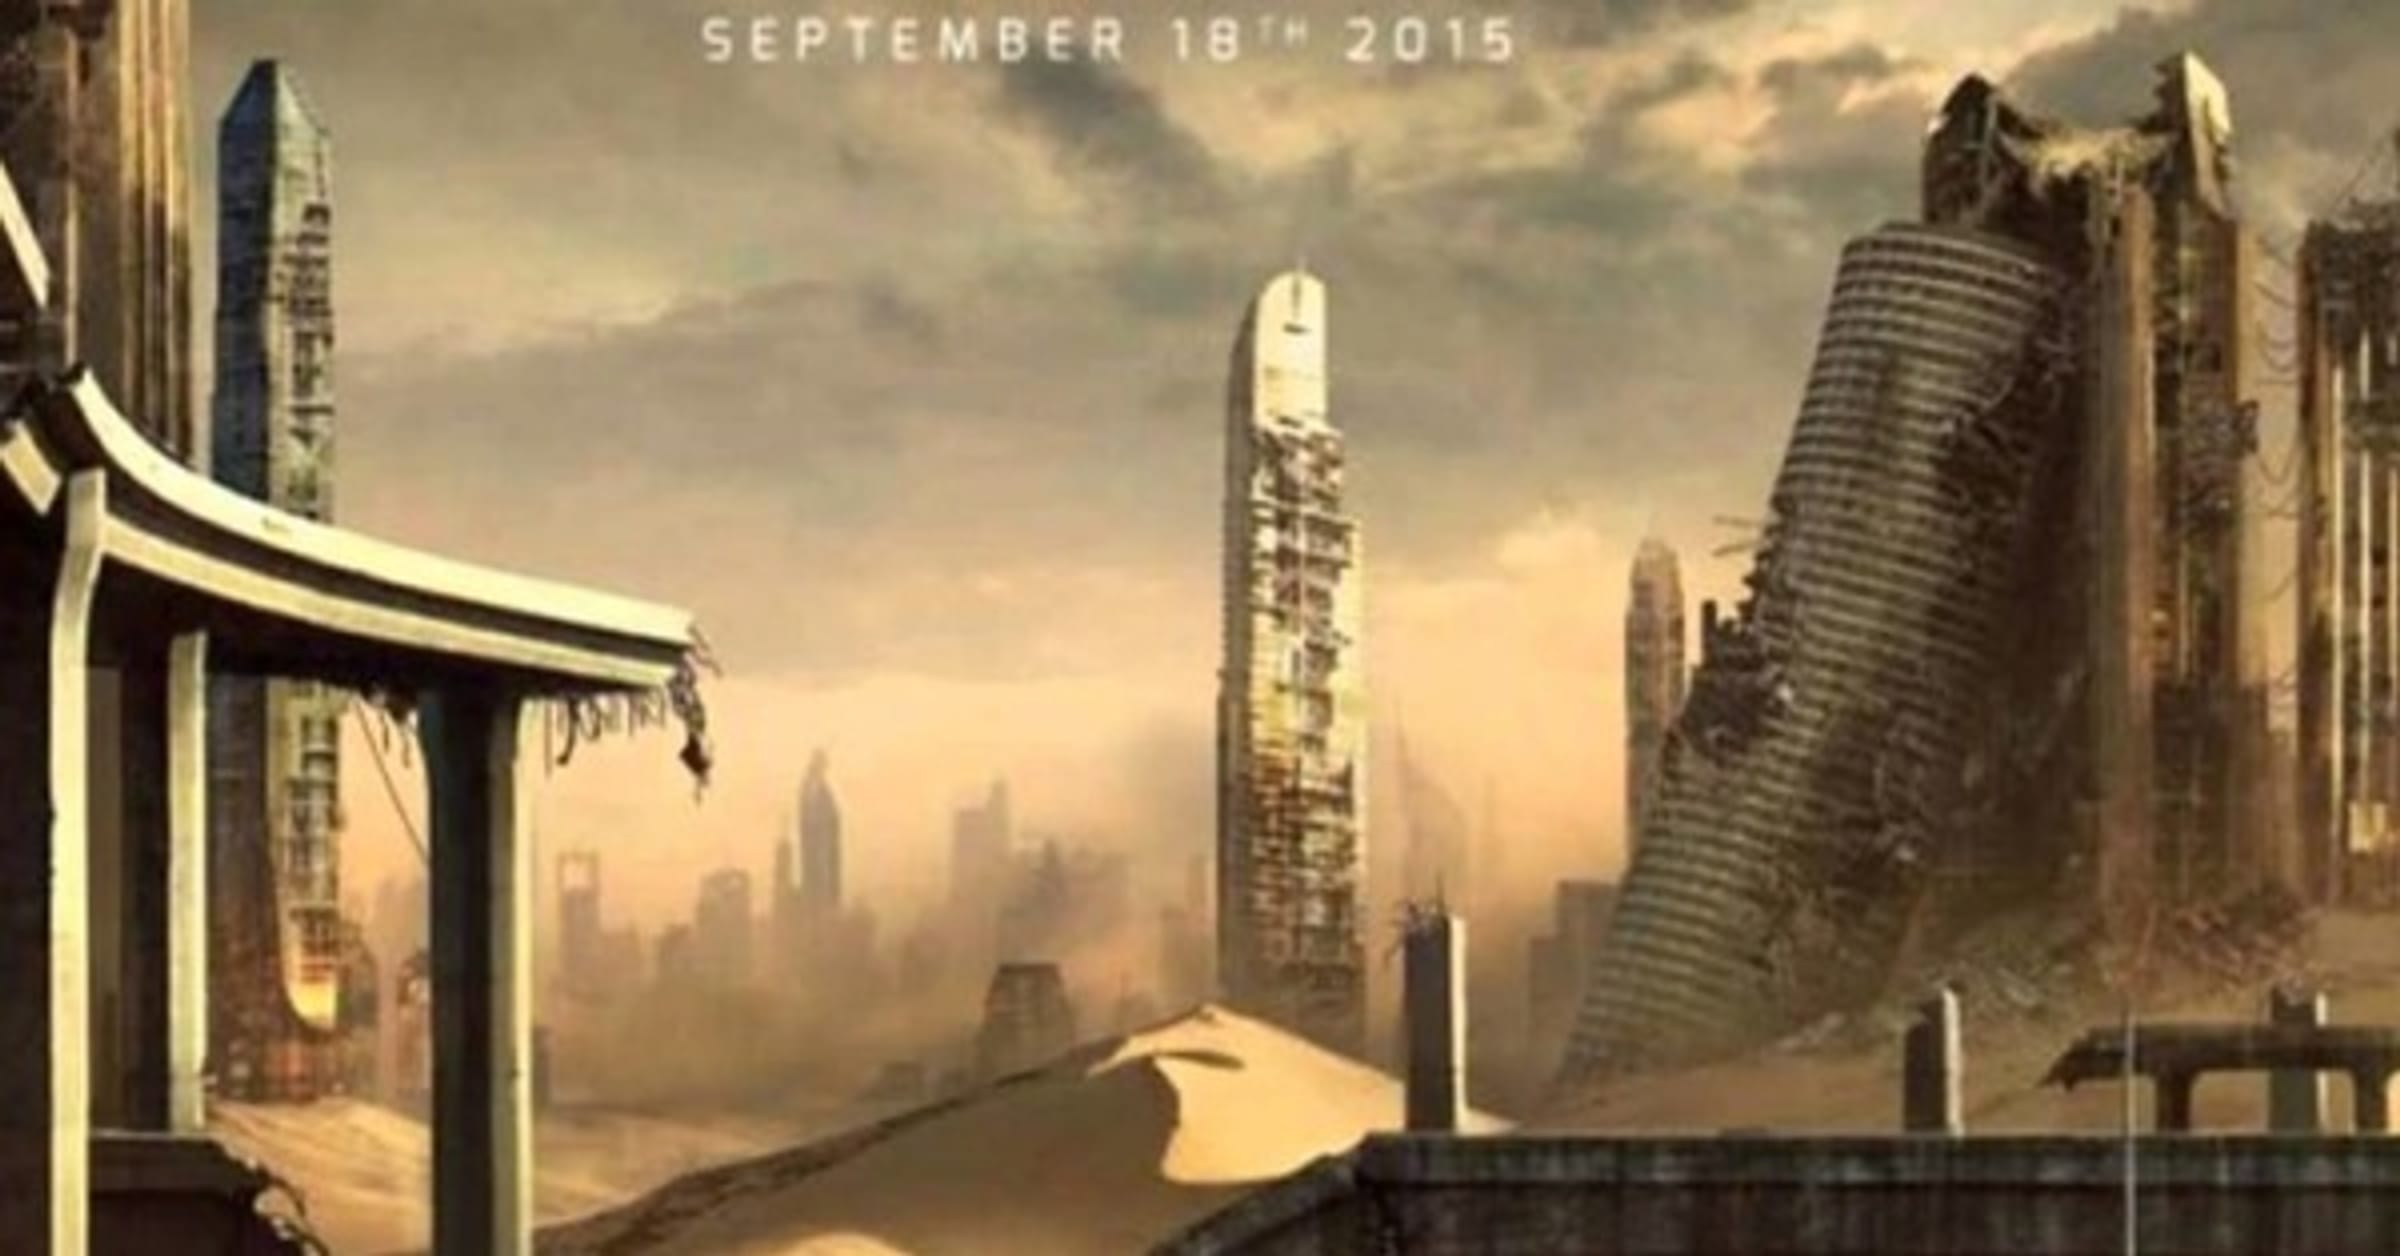 Watch the 'Maze Runner: The Scorch Trials' Cast Play Save or Kill 